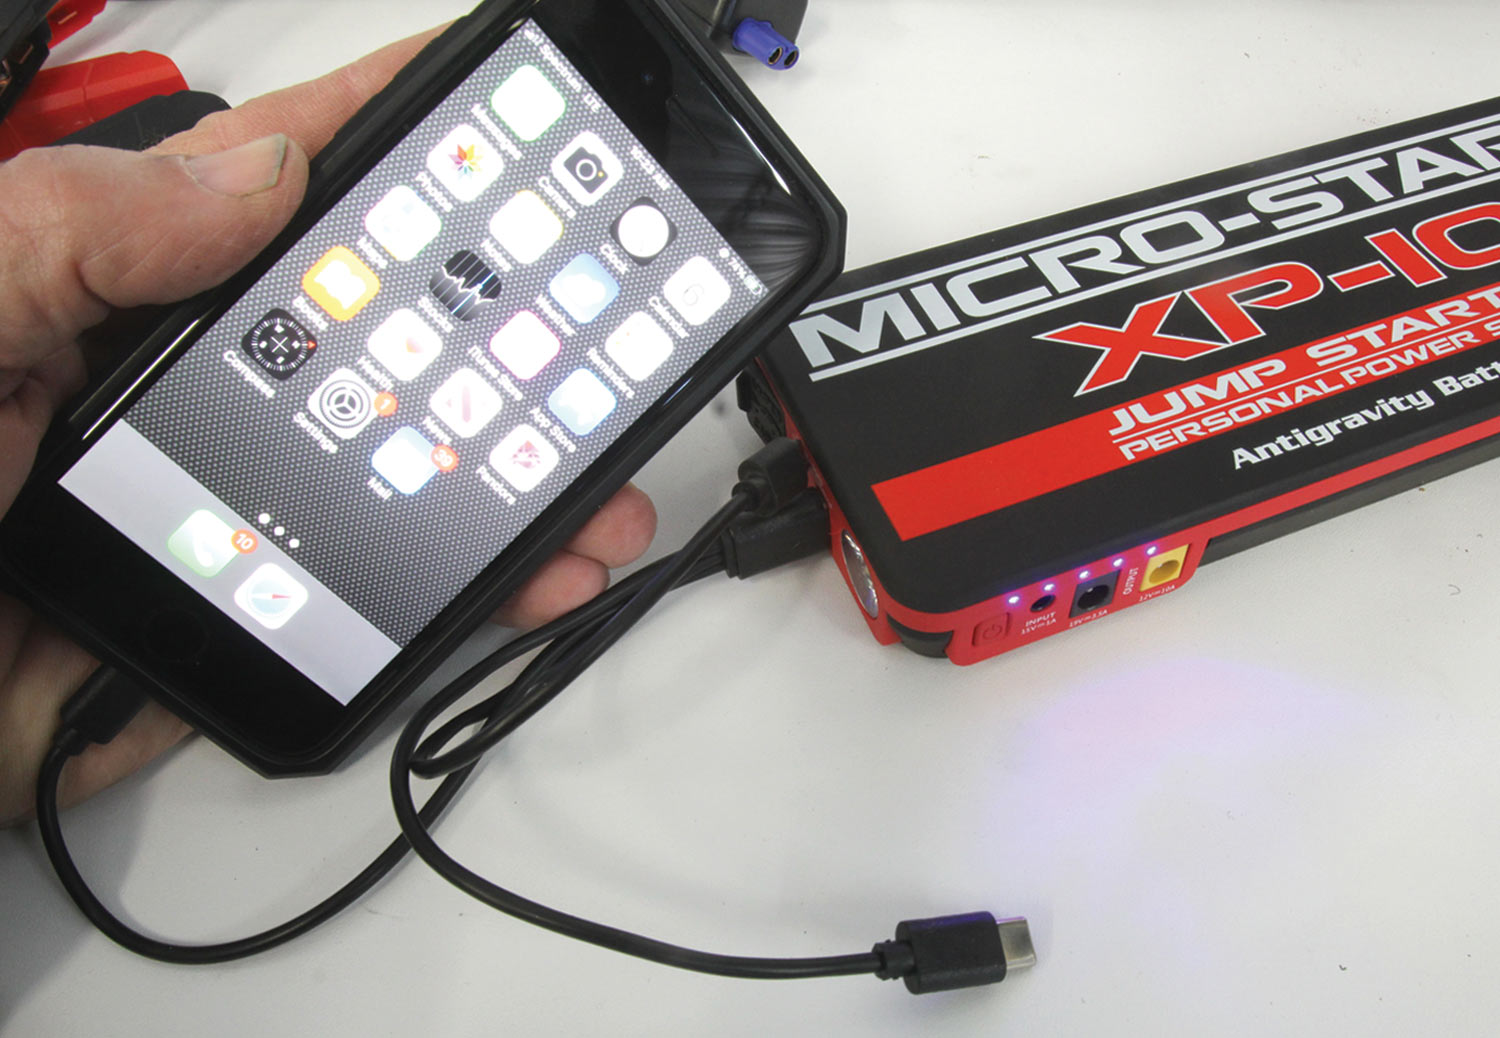 a Micro-Start unit connected to a smartphone with a USB adapter